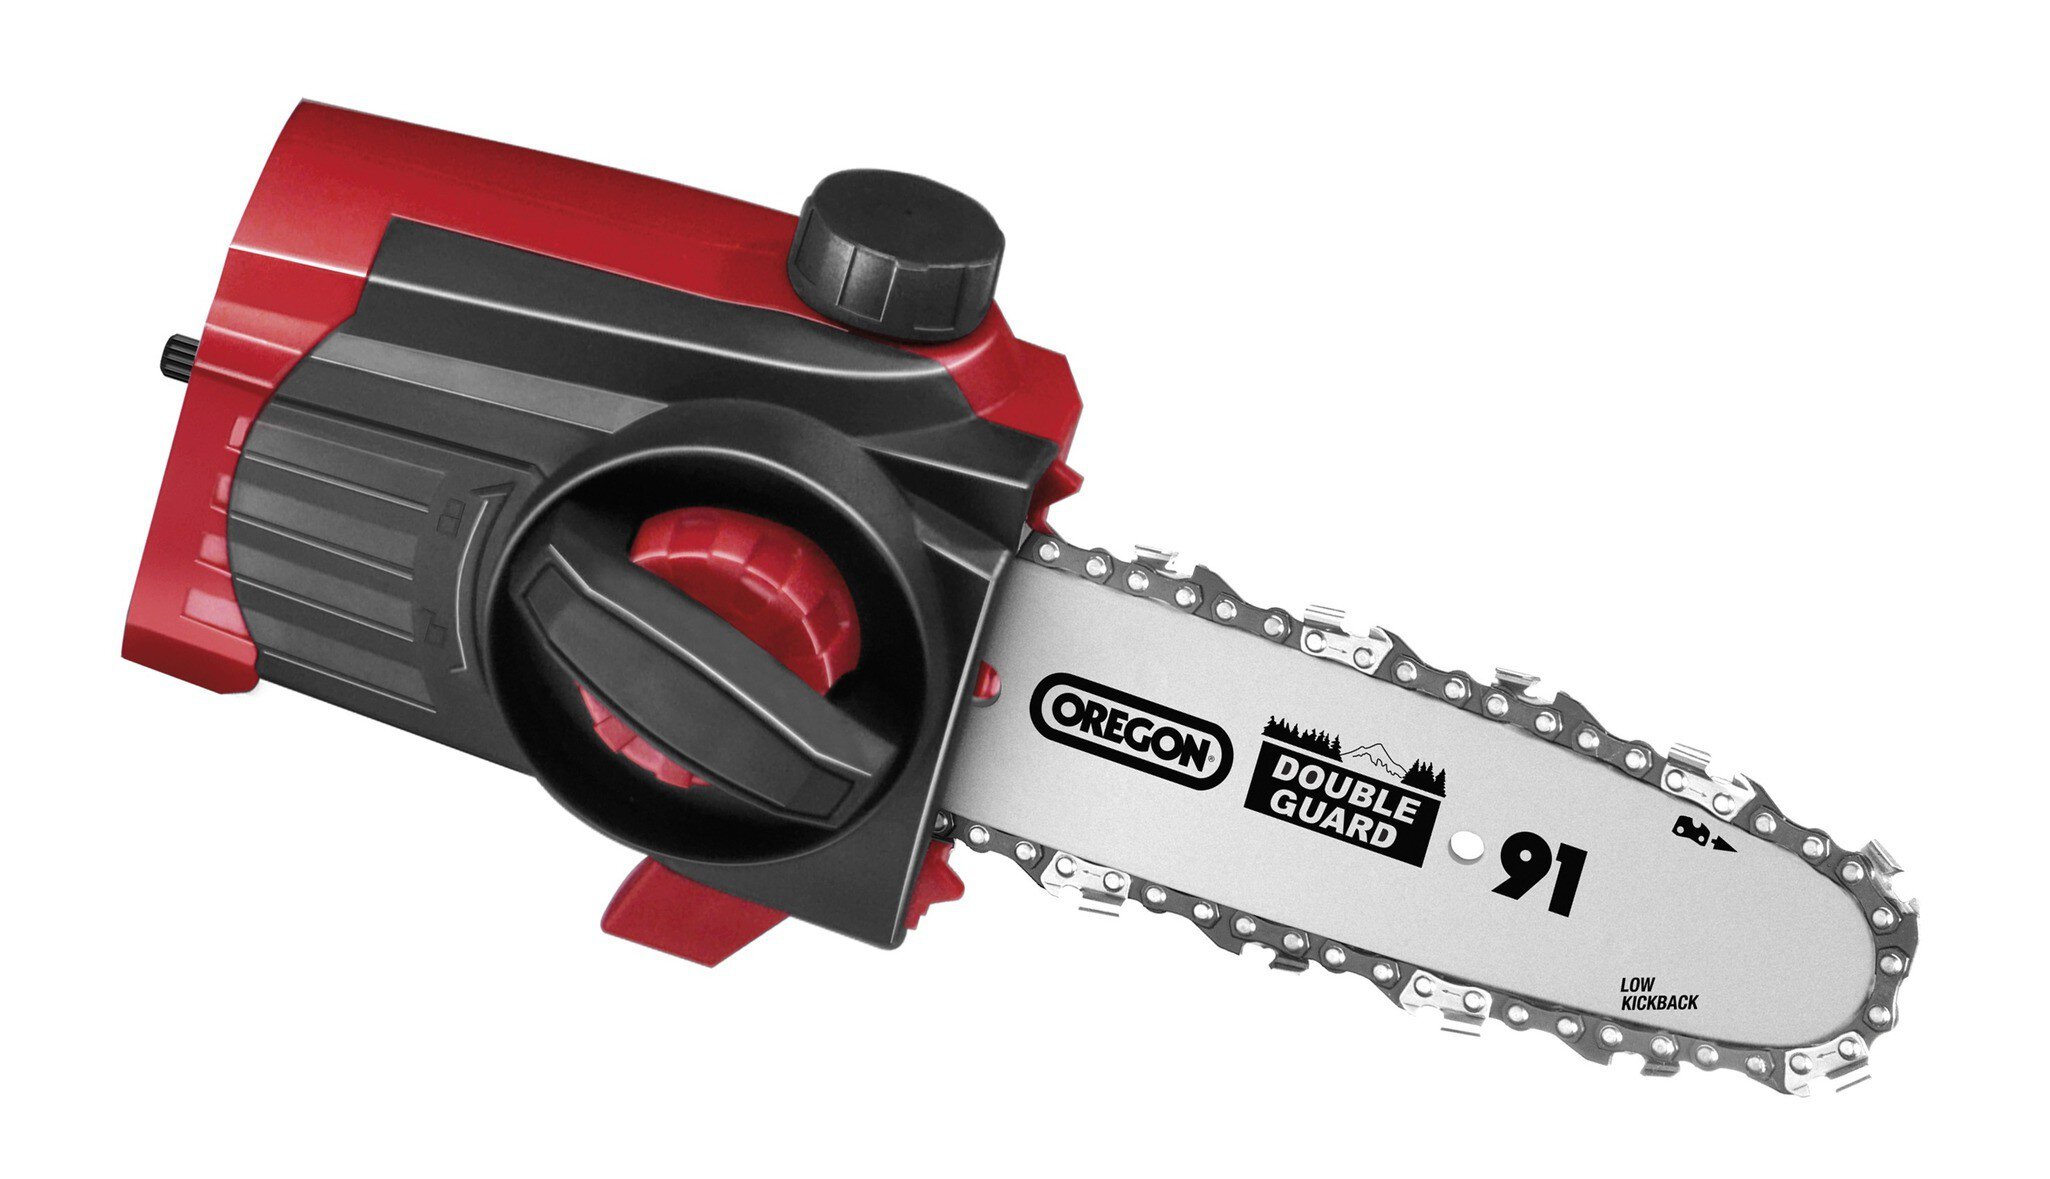 ozito-cl-pole-mounted-powered-pruner-3410813-productimage-103